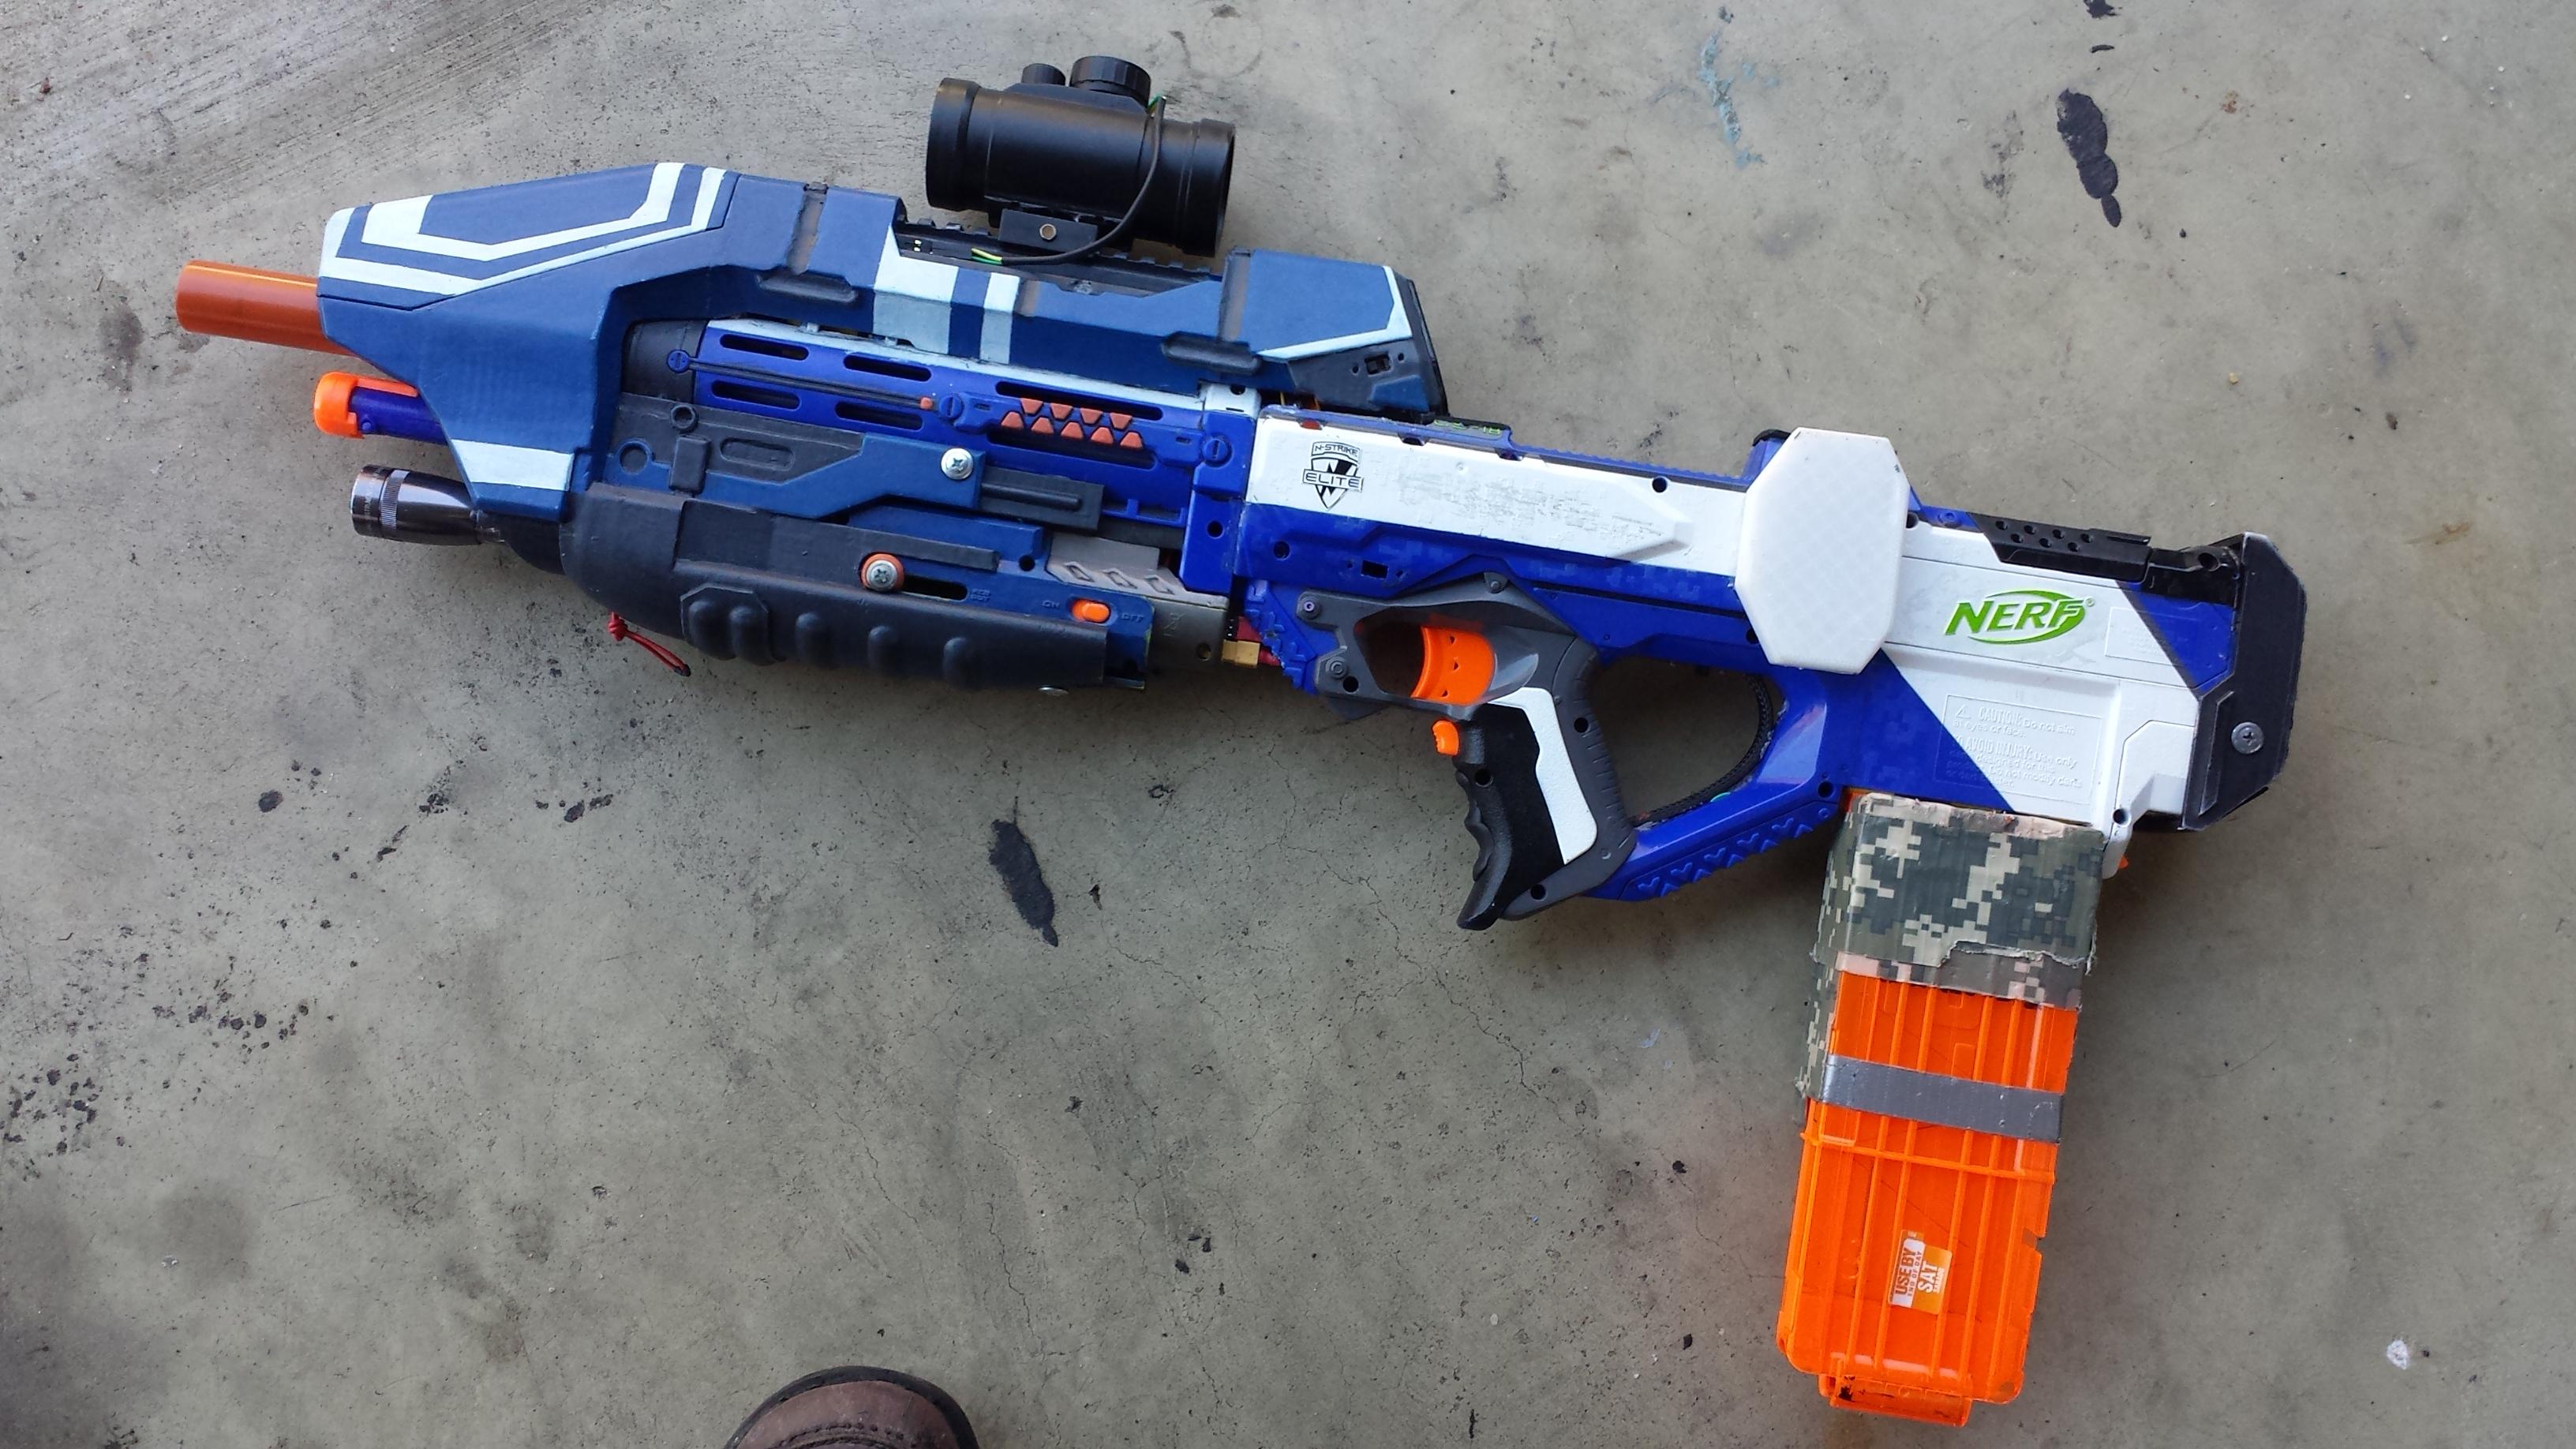 3D Printed Nerf Halo 5 Assault Rifle Takes Humans vs. Zombies Game